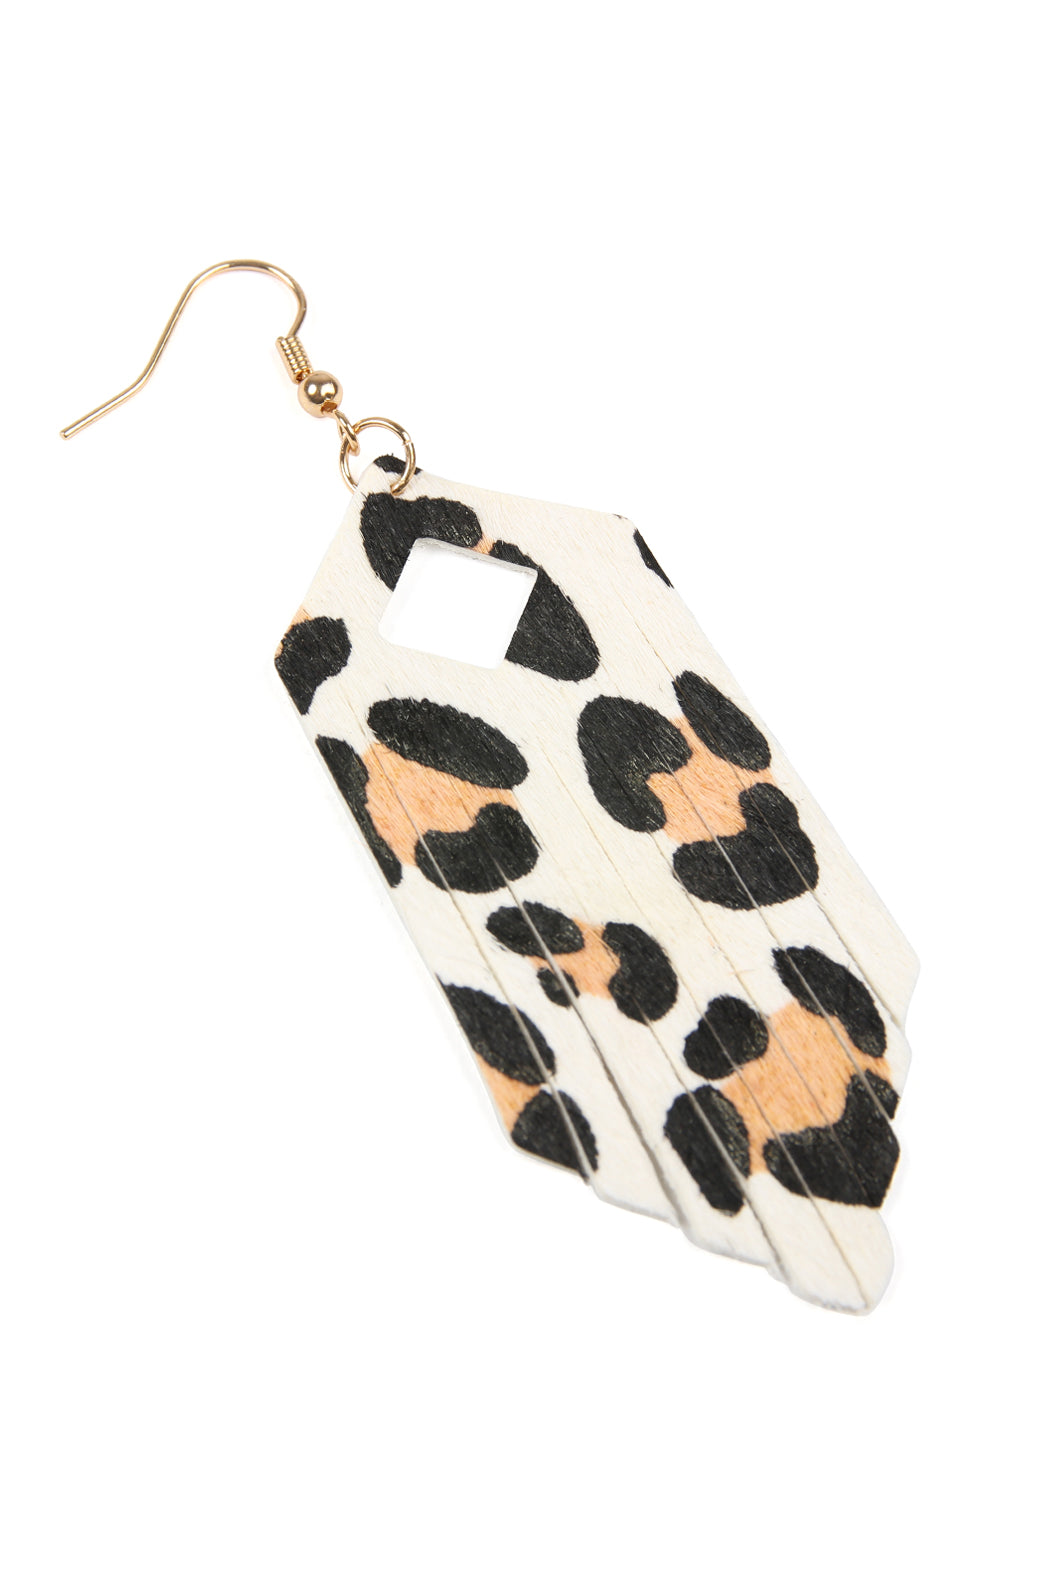 FRINGE HEXAGON LEOPARD LEATHER HOOK EARRINGS/6PAIRS (NOW $1.50 ONLY!)